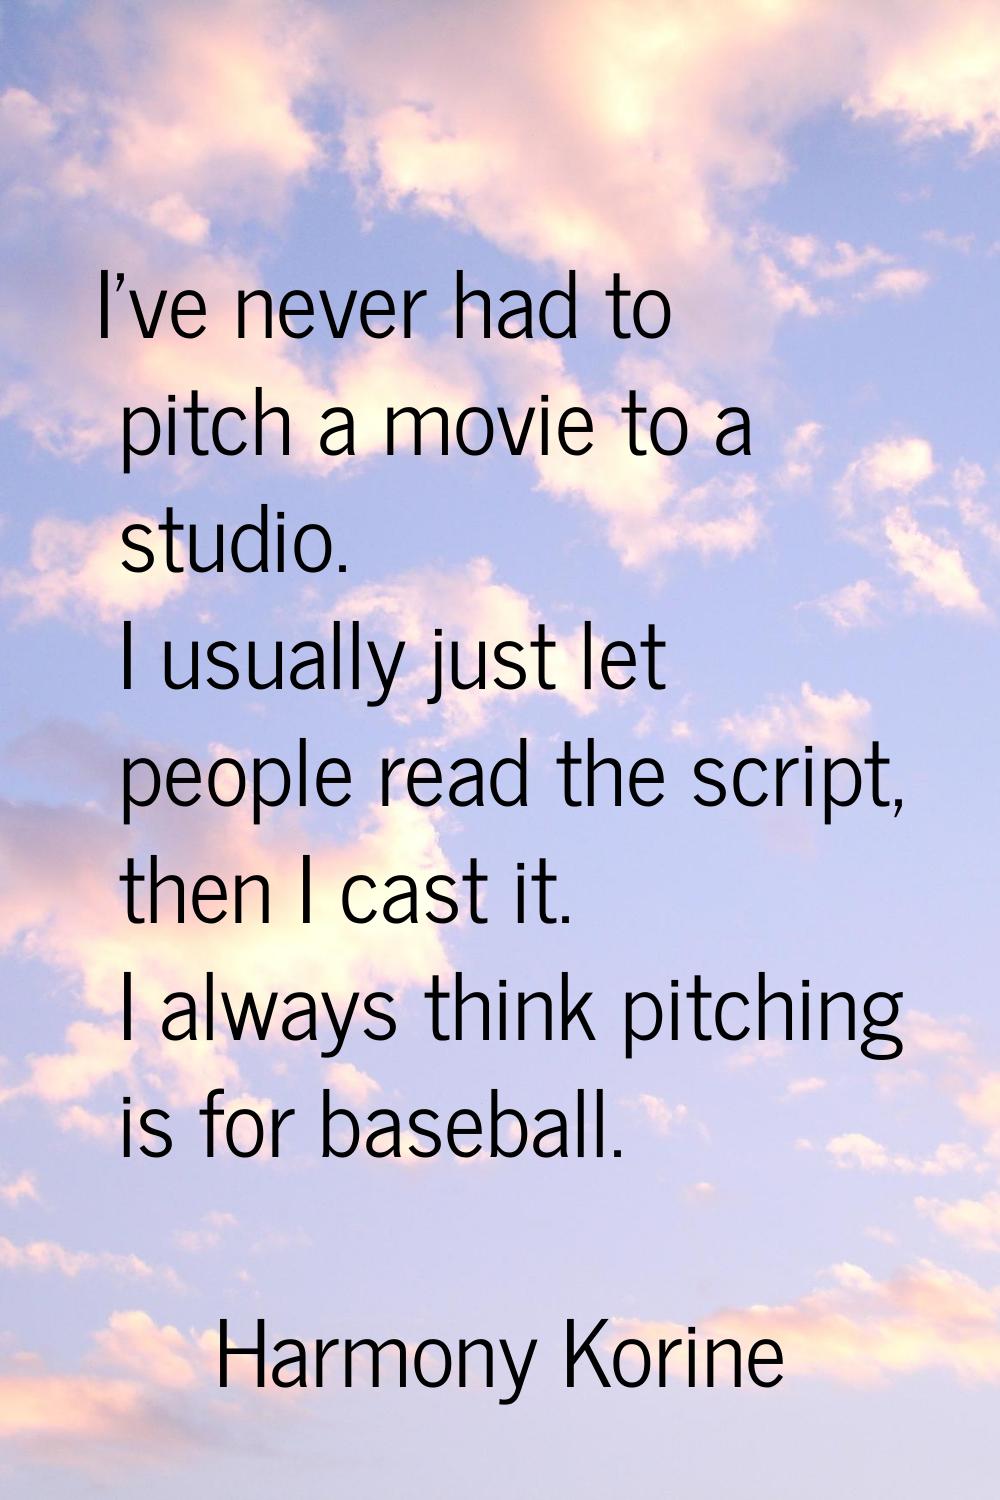 I've never had to pitch a movie to a studio. I usually just let people read the script, then I cast